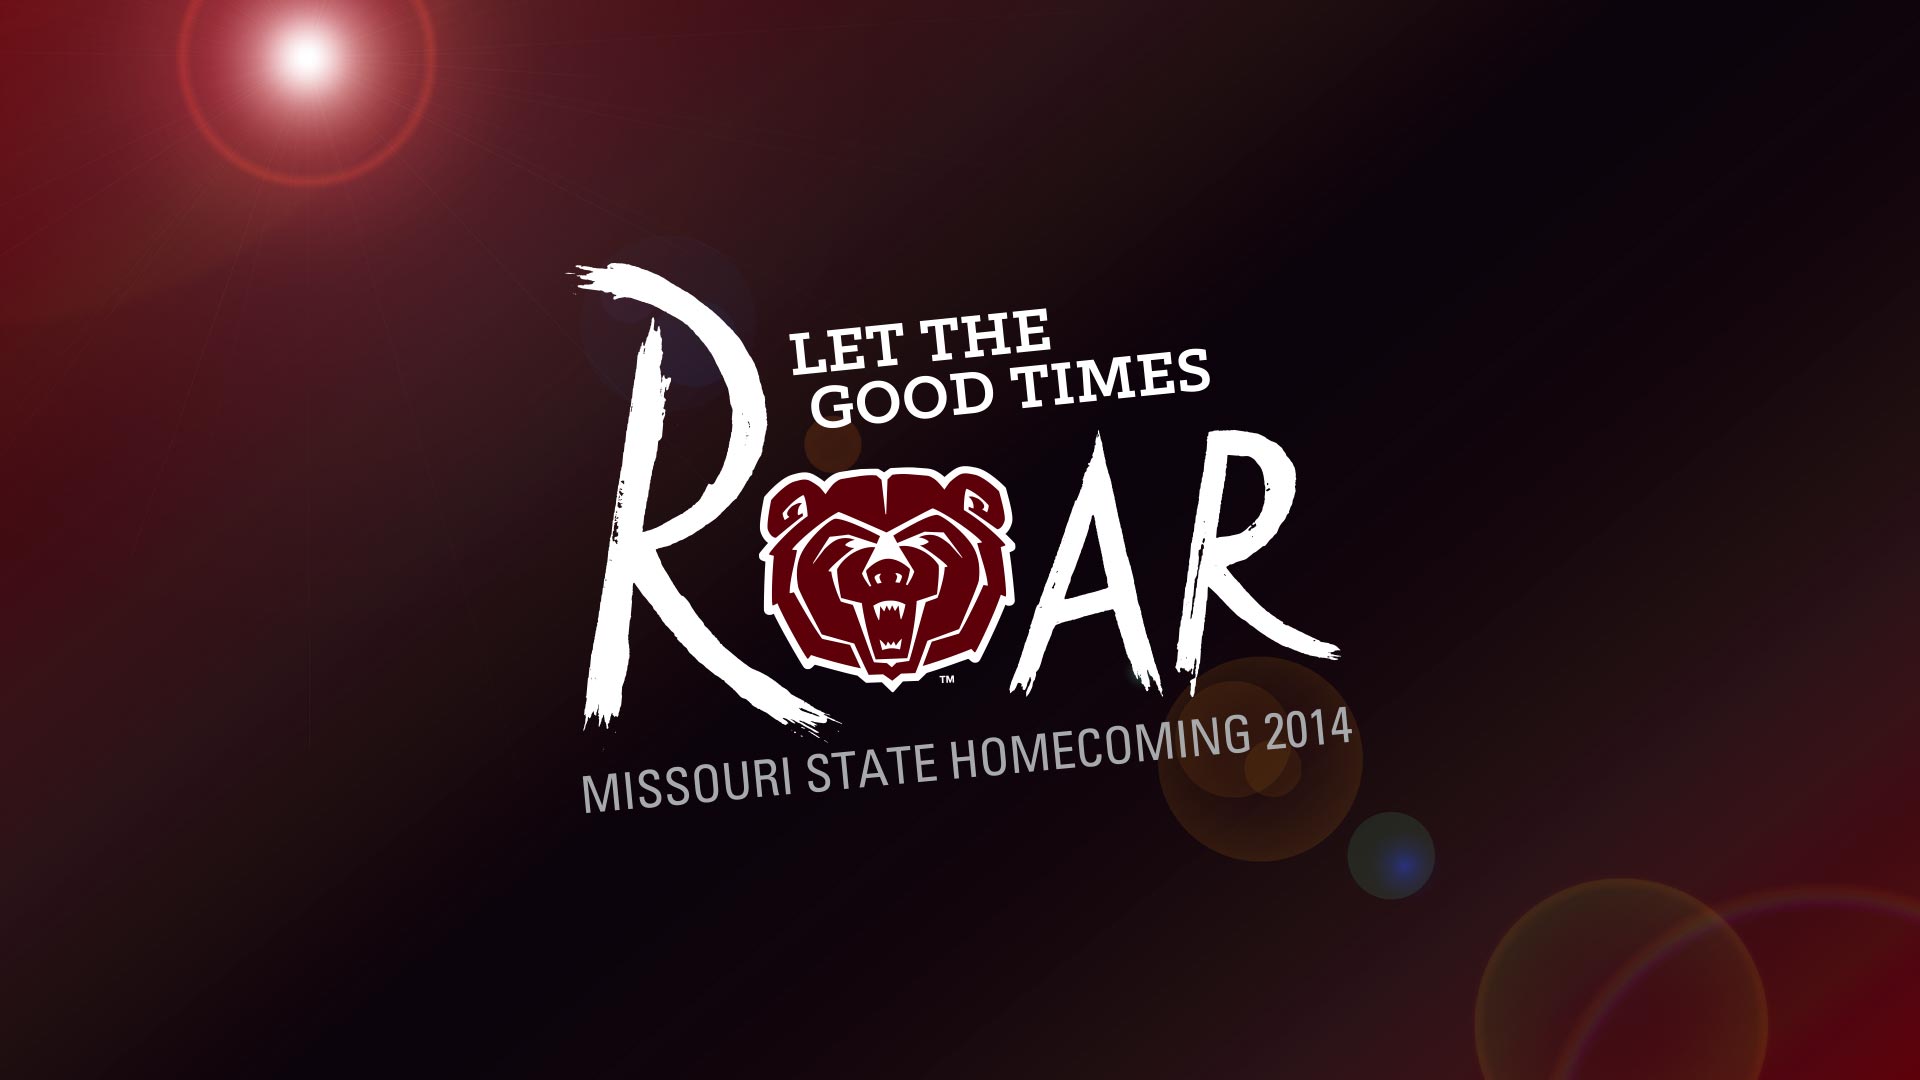 Let the good times roar: Missouri State homecoming 2014